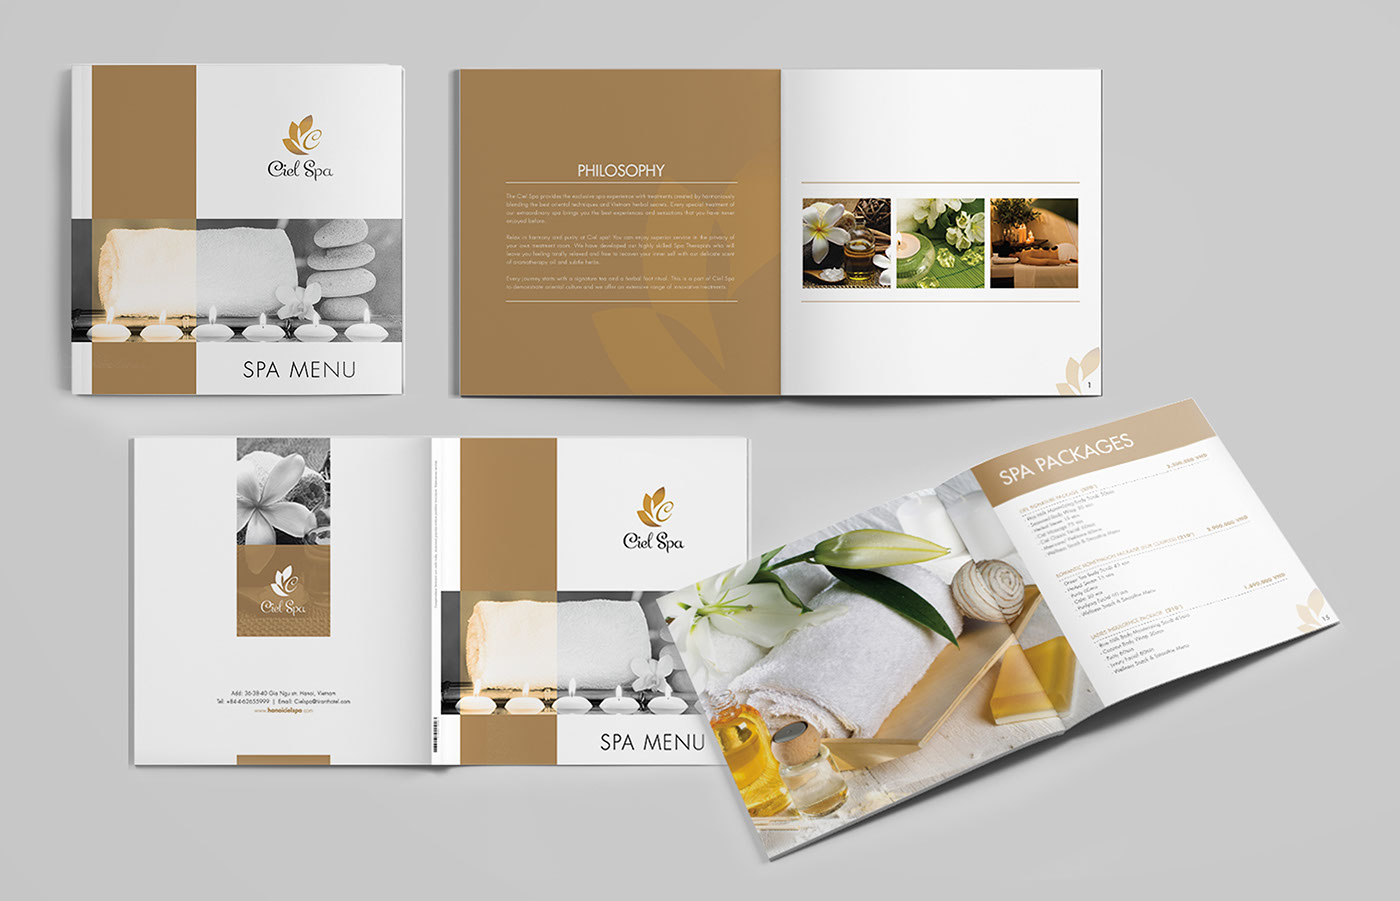 vector   tải   nền   design   background   template   treatment   services   templates   free   download   pdf   ideas   cover   việt   anh   medical   me   